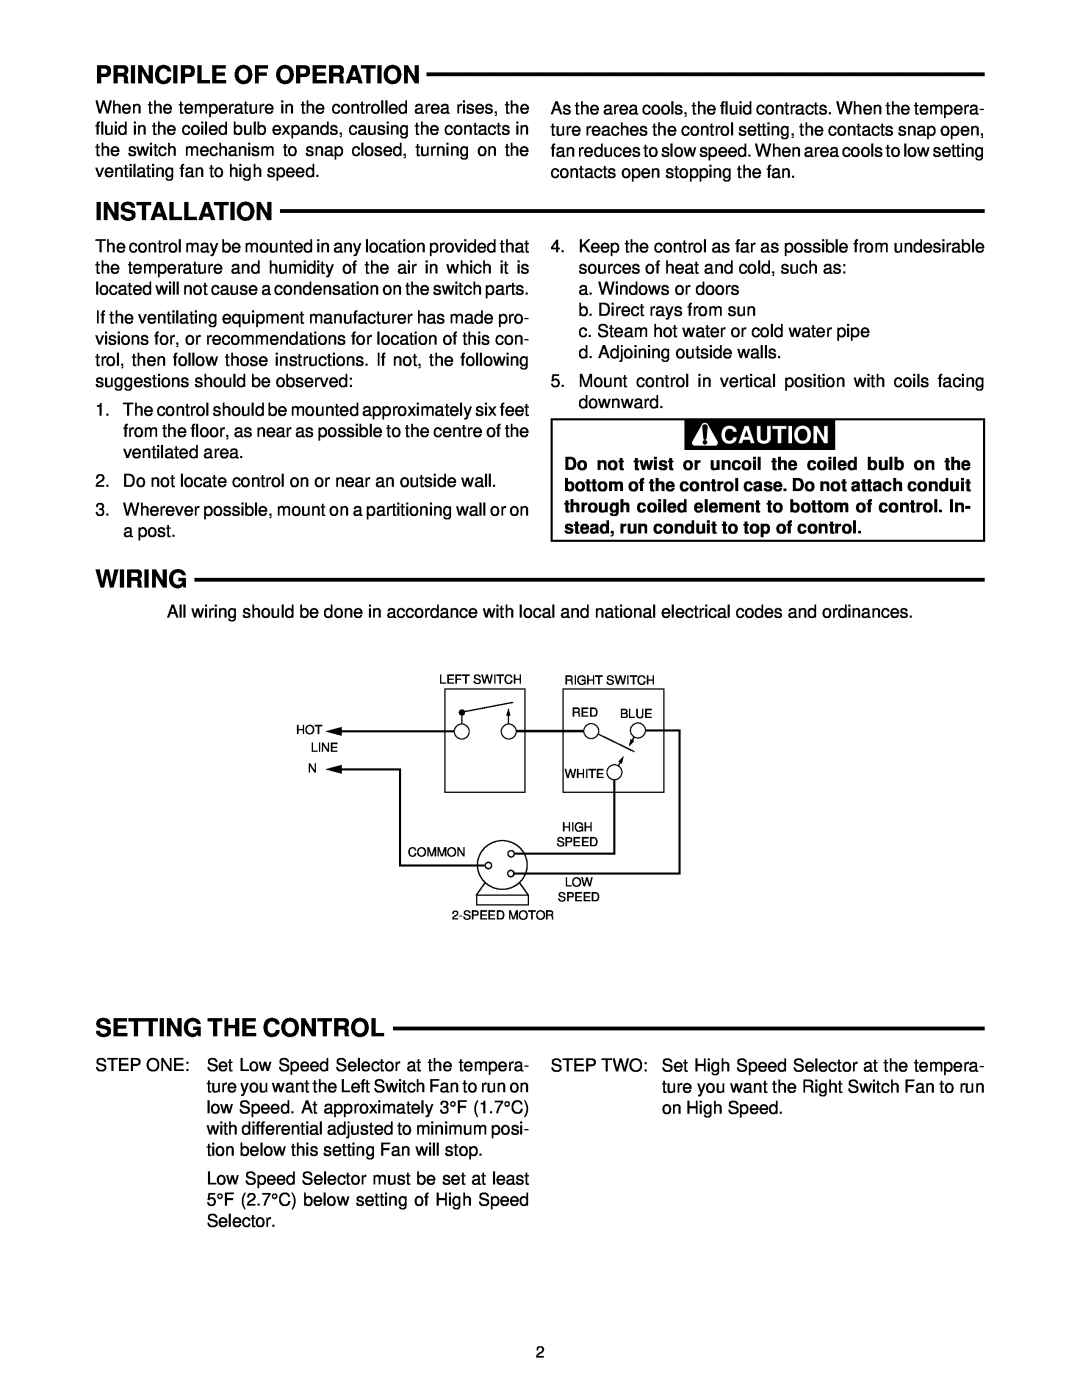 White Rodgers 259-6 installation instructions Principle Of Operation, Installation, Wiring, Setting The Control 